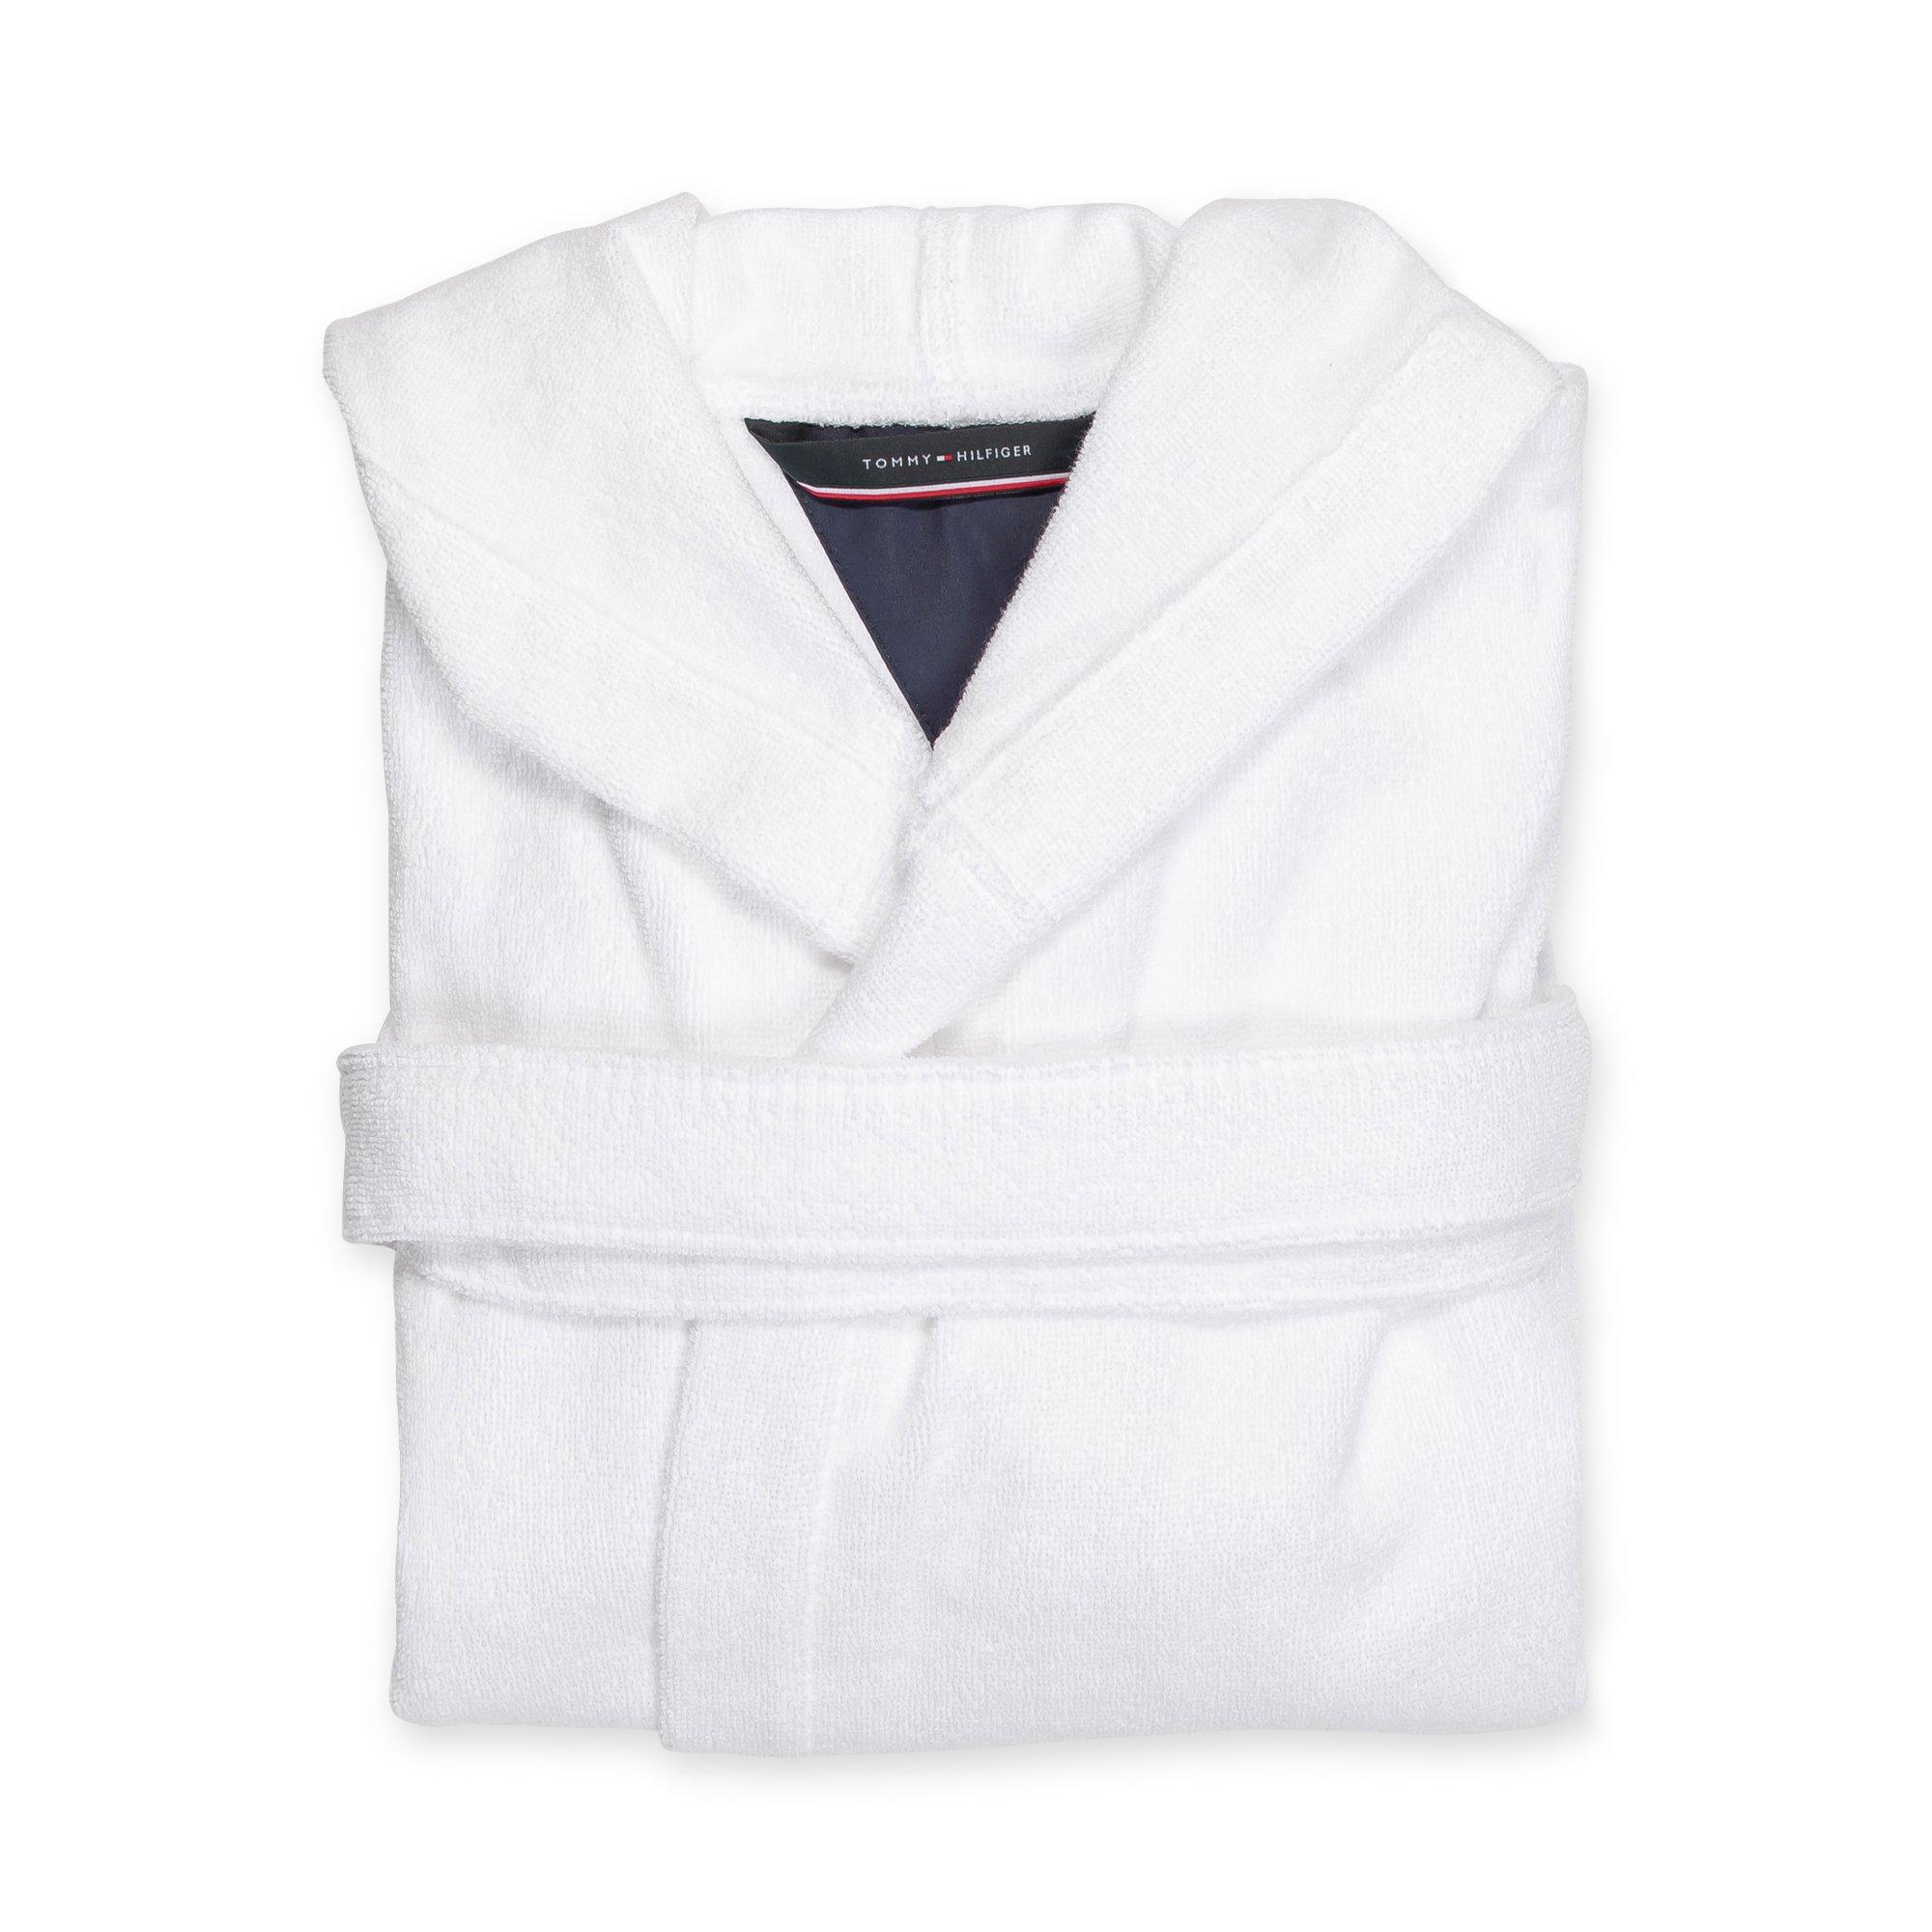 TOMMY HILFIGER Accappatoio, unisex Degree 